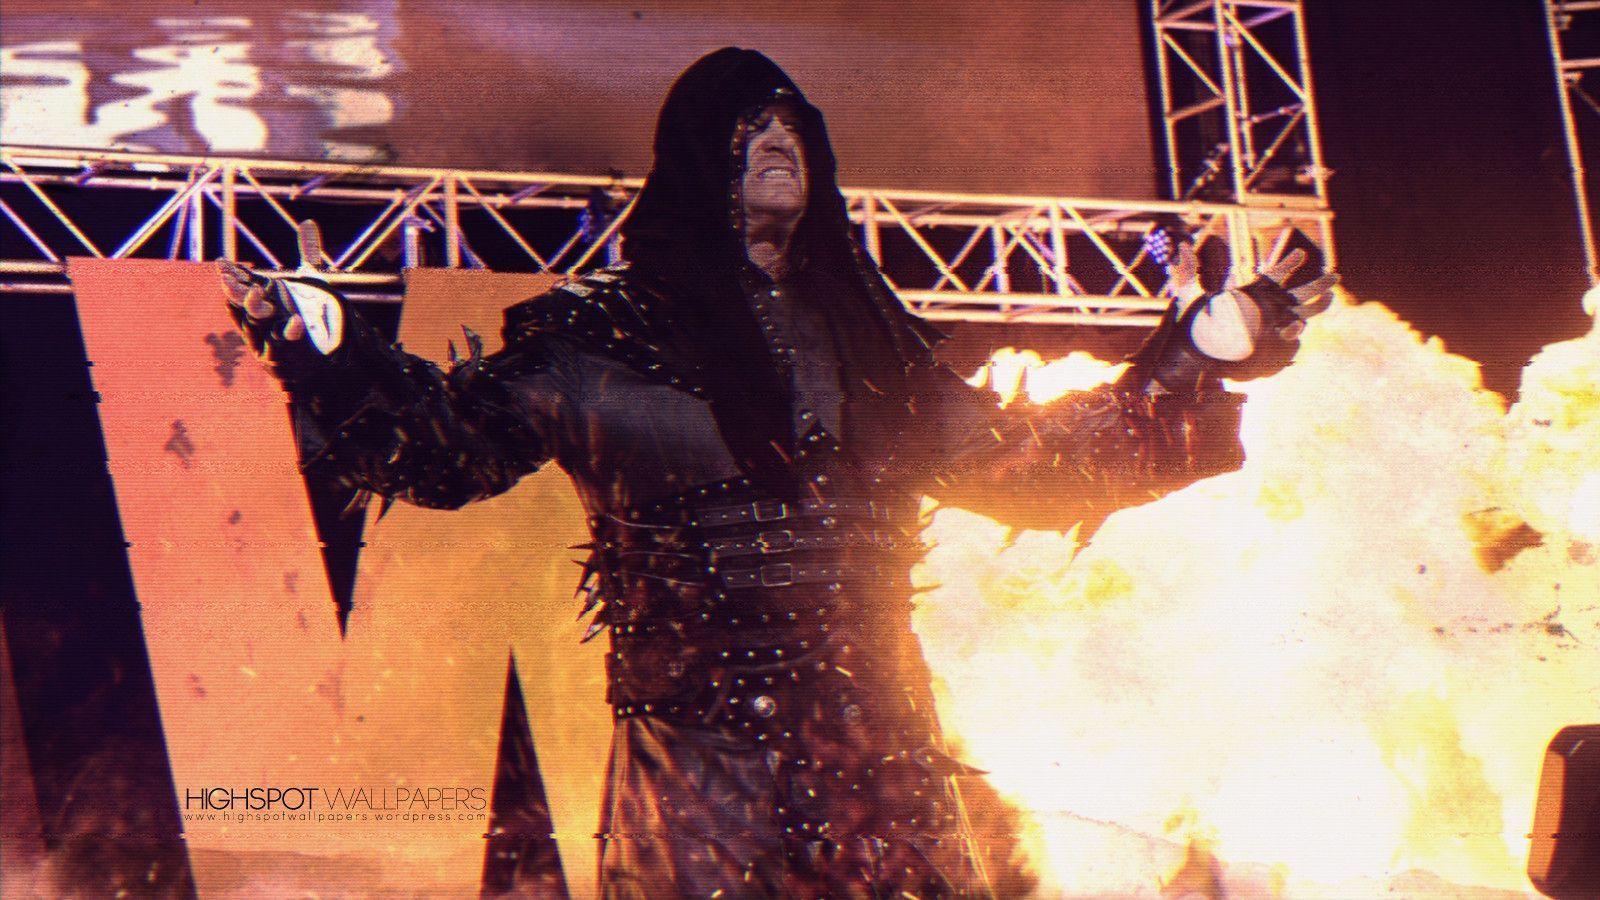 The Undertaker wallpaper HD background download Facebook Covers